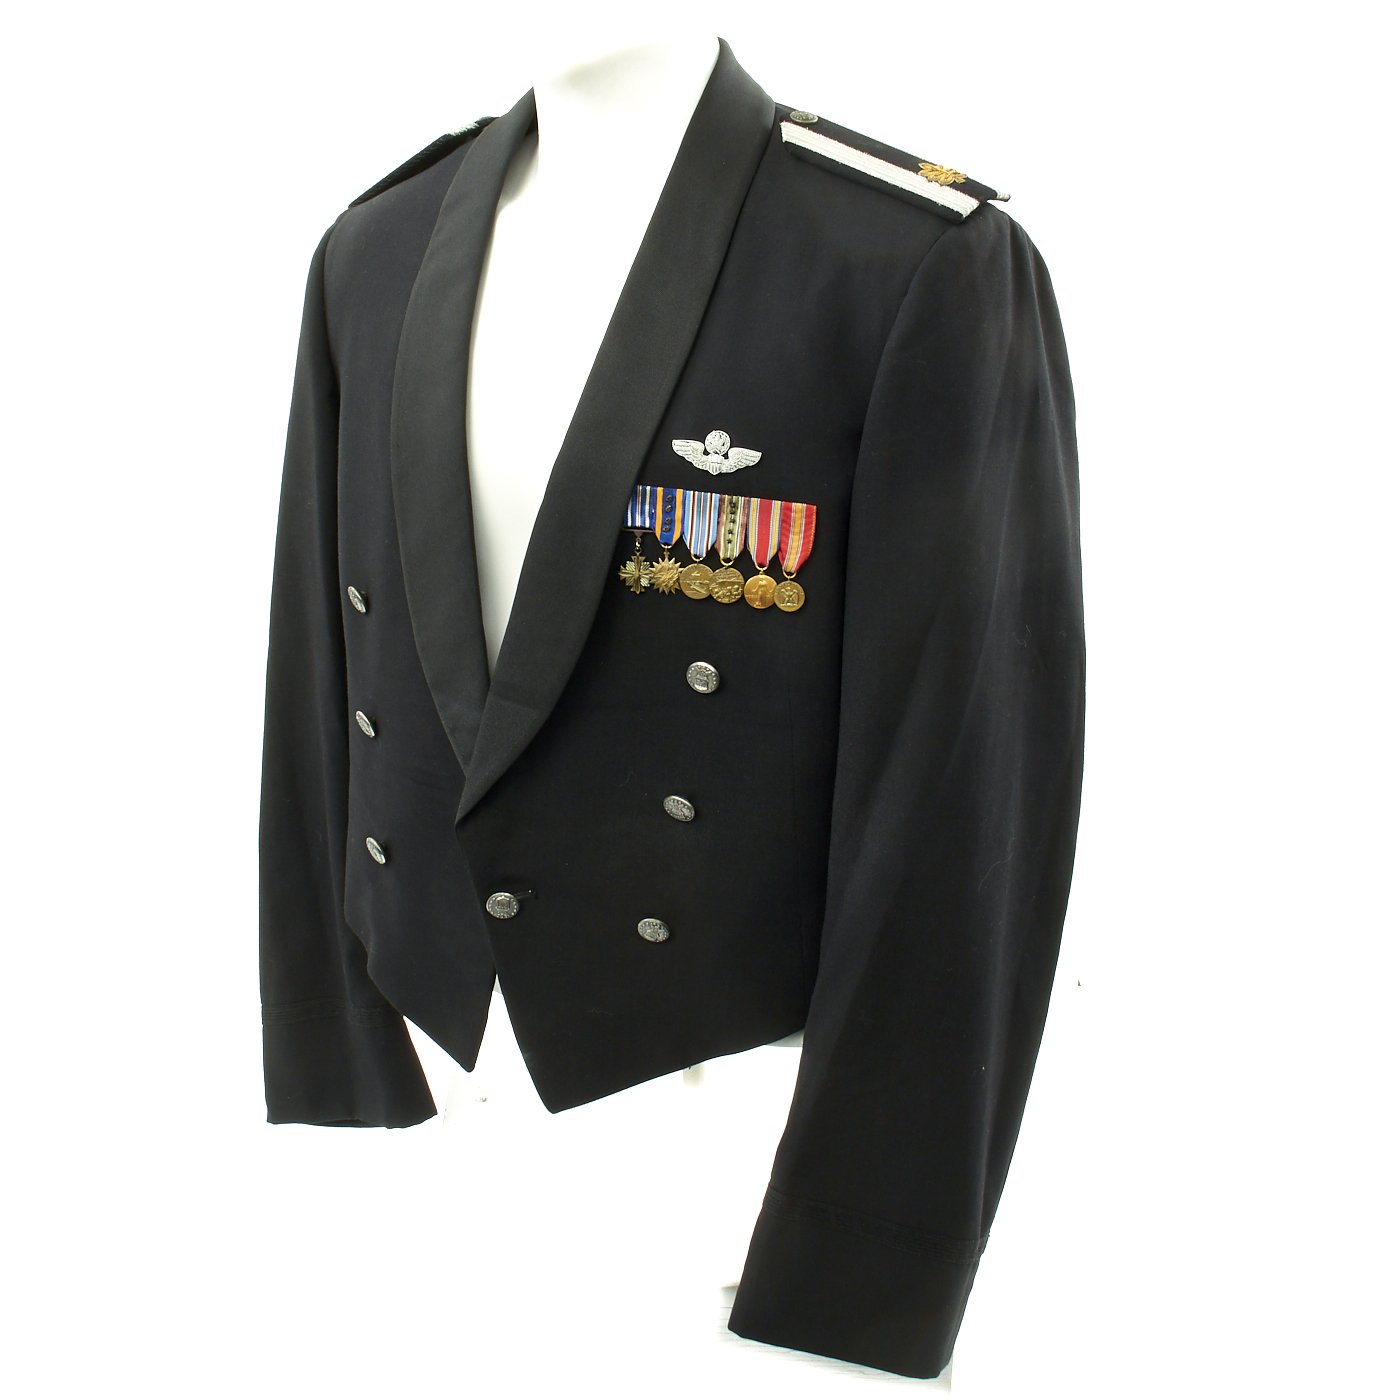 Double Breasted Uniform Frock - Purchase: Period Military Uniforms